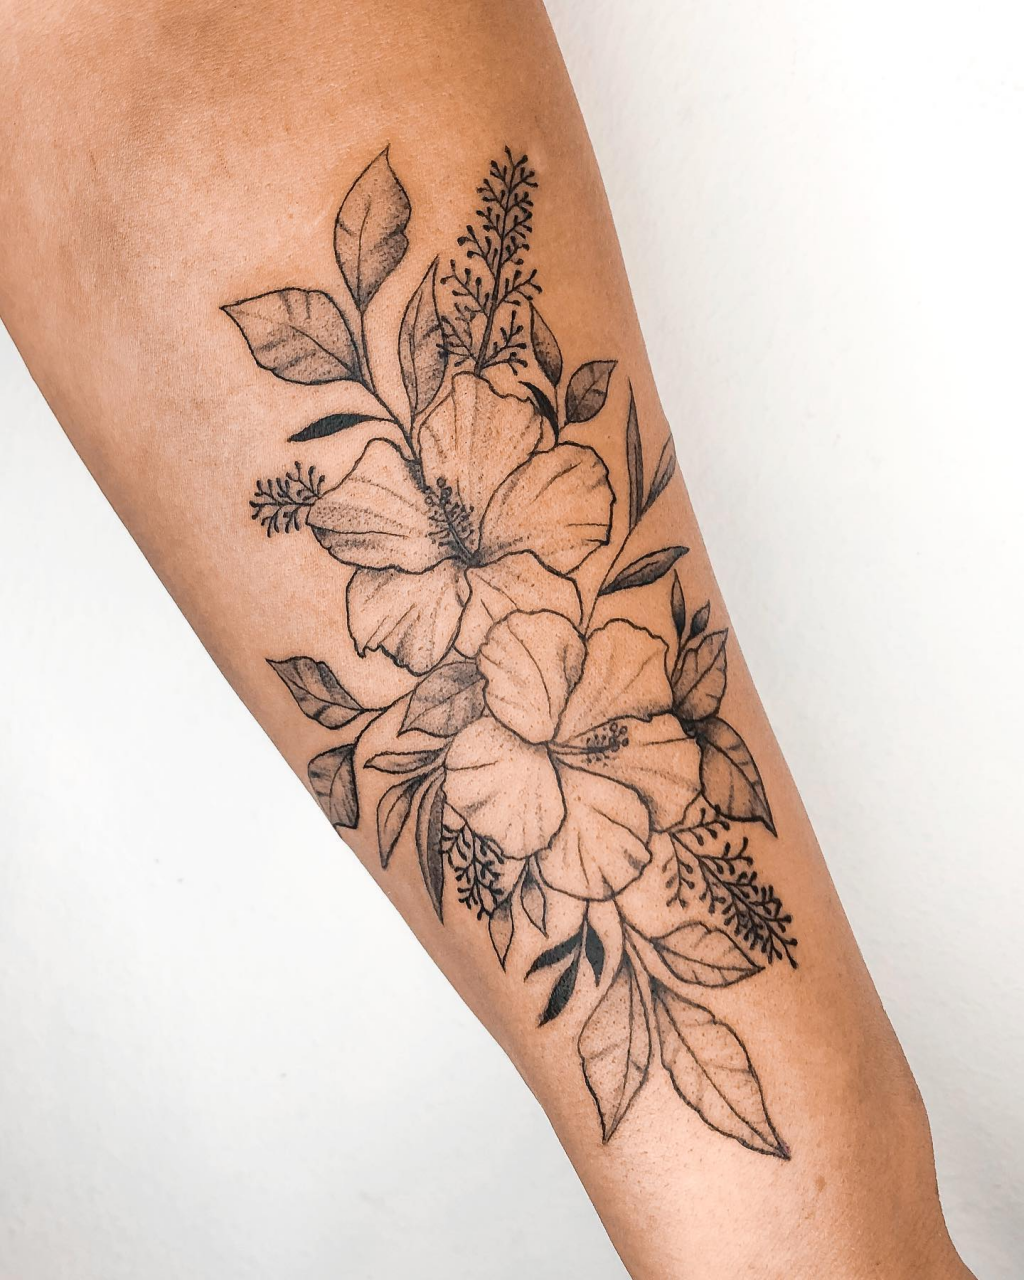 Top 45 Classy Female Half Sleeve Tattoos To Make You Look Outstanding